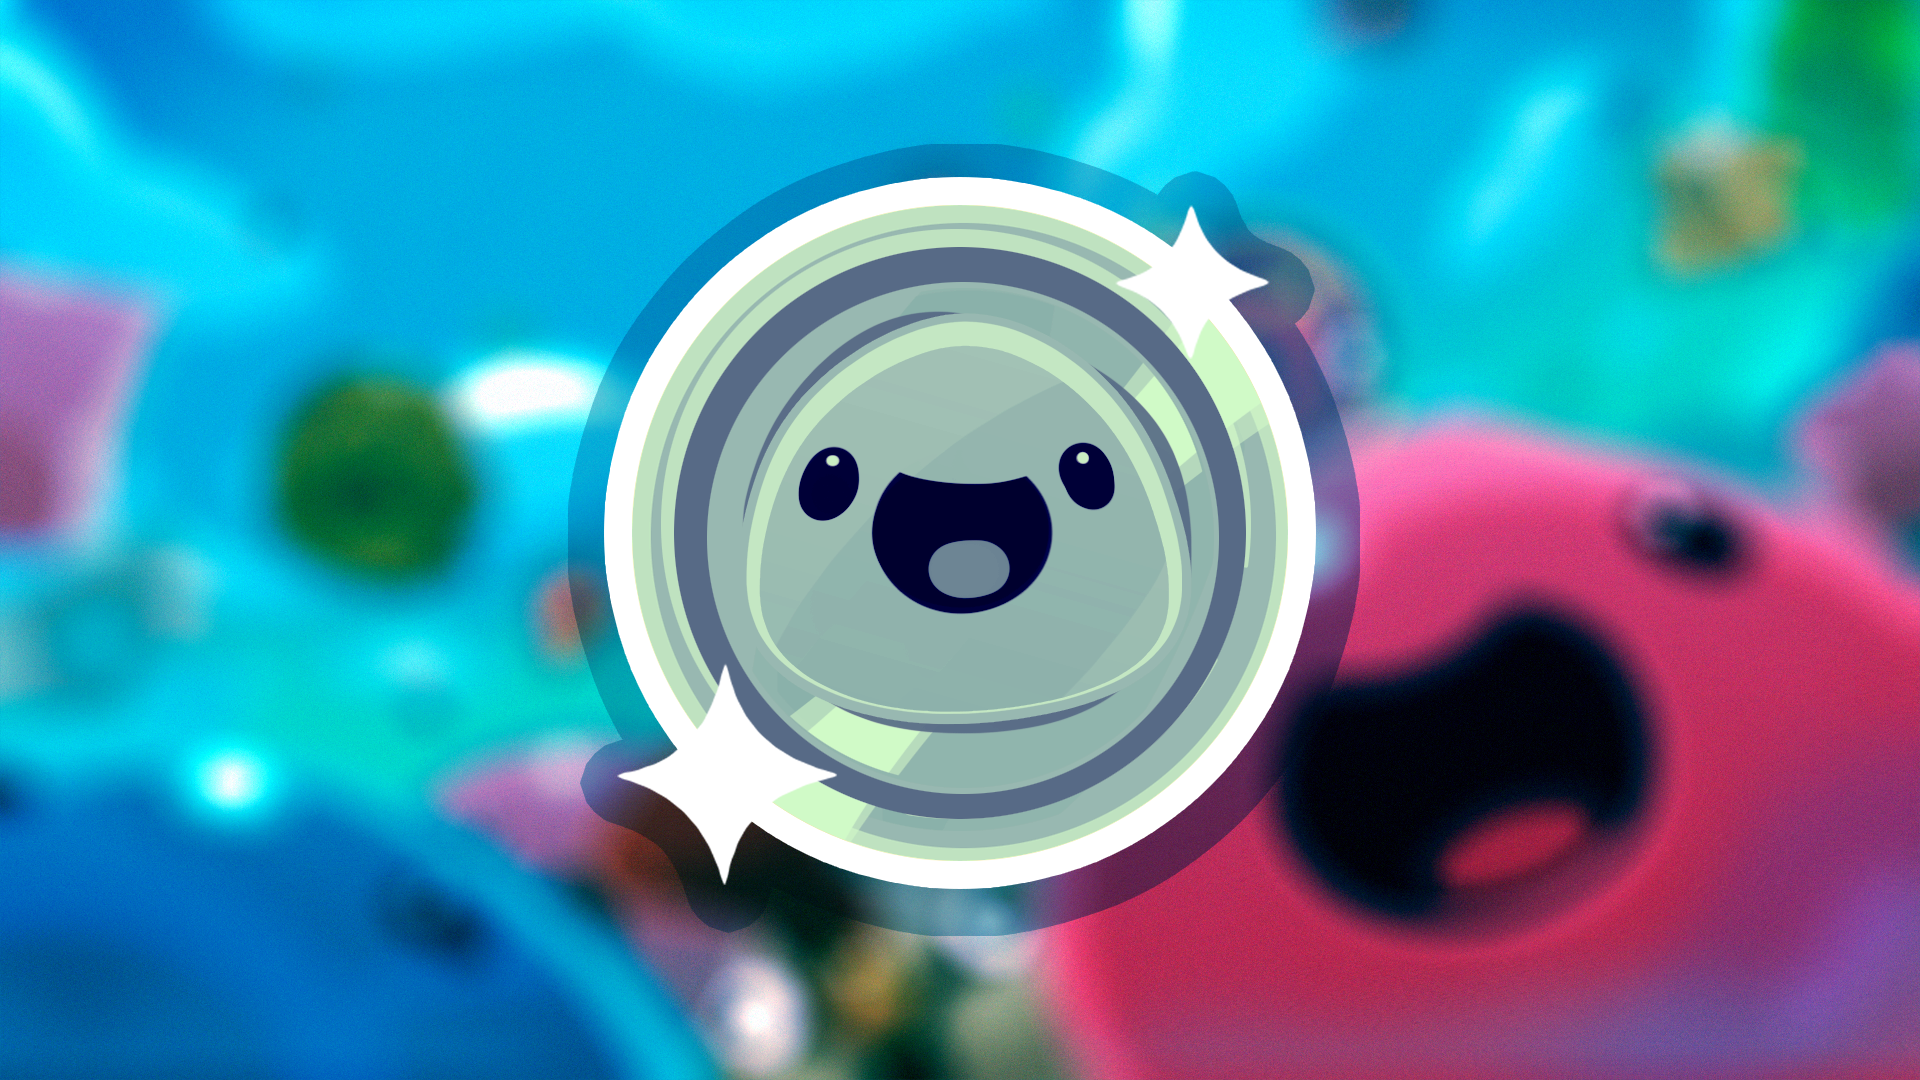 Icon for Fully Loaded